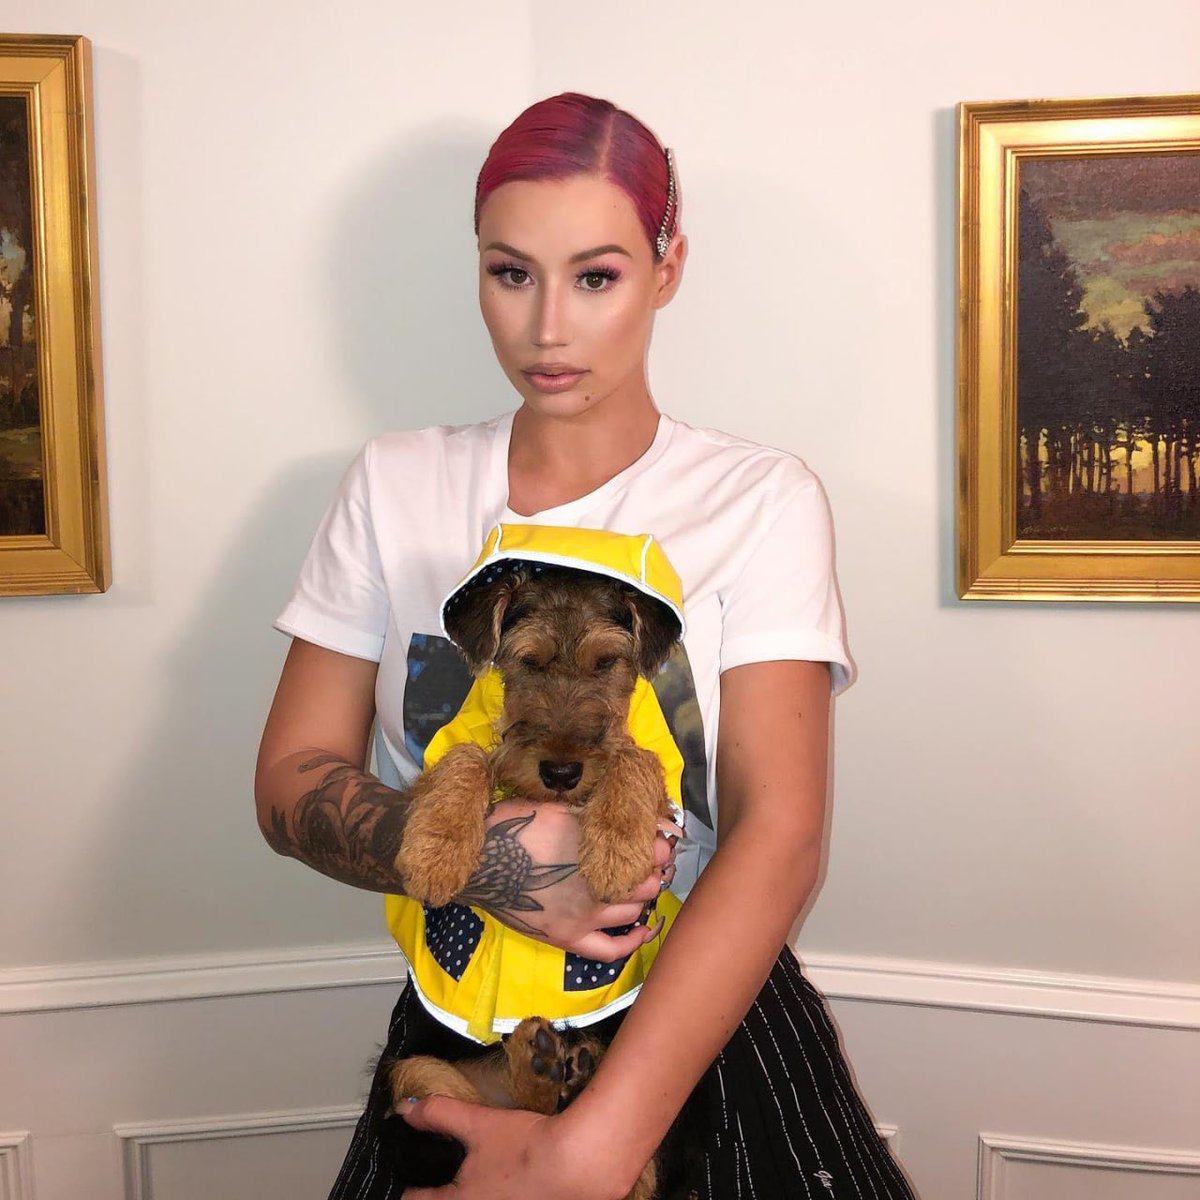 So $MOTHER is at $70M and @IGGYAZALEA dog $BAM is at $1m I like the odds here, longing this doggo